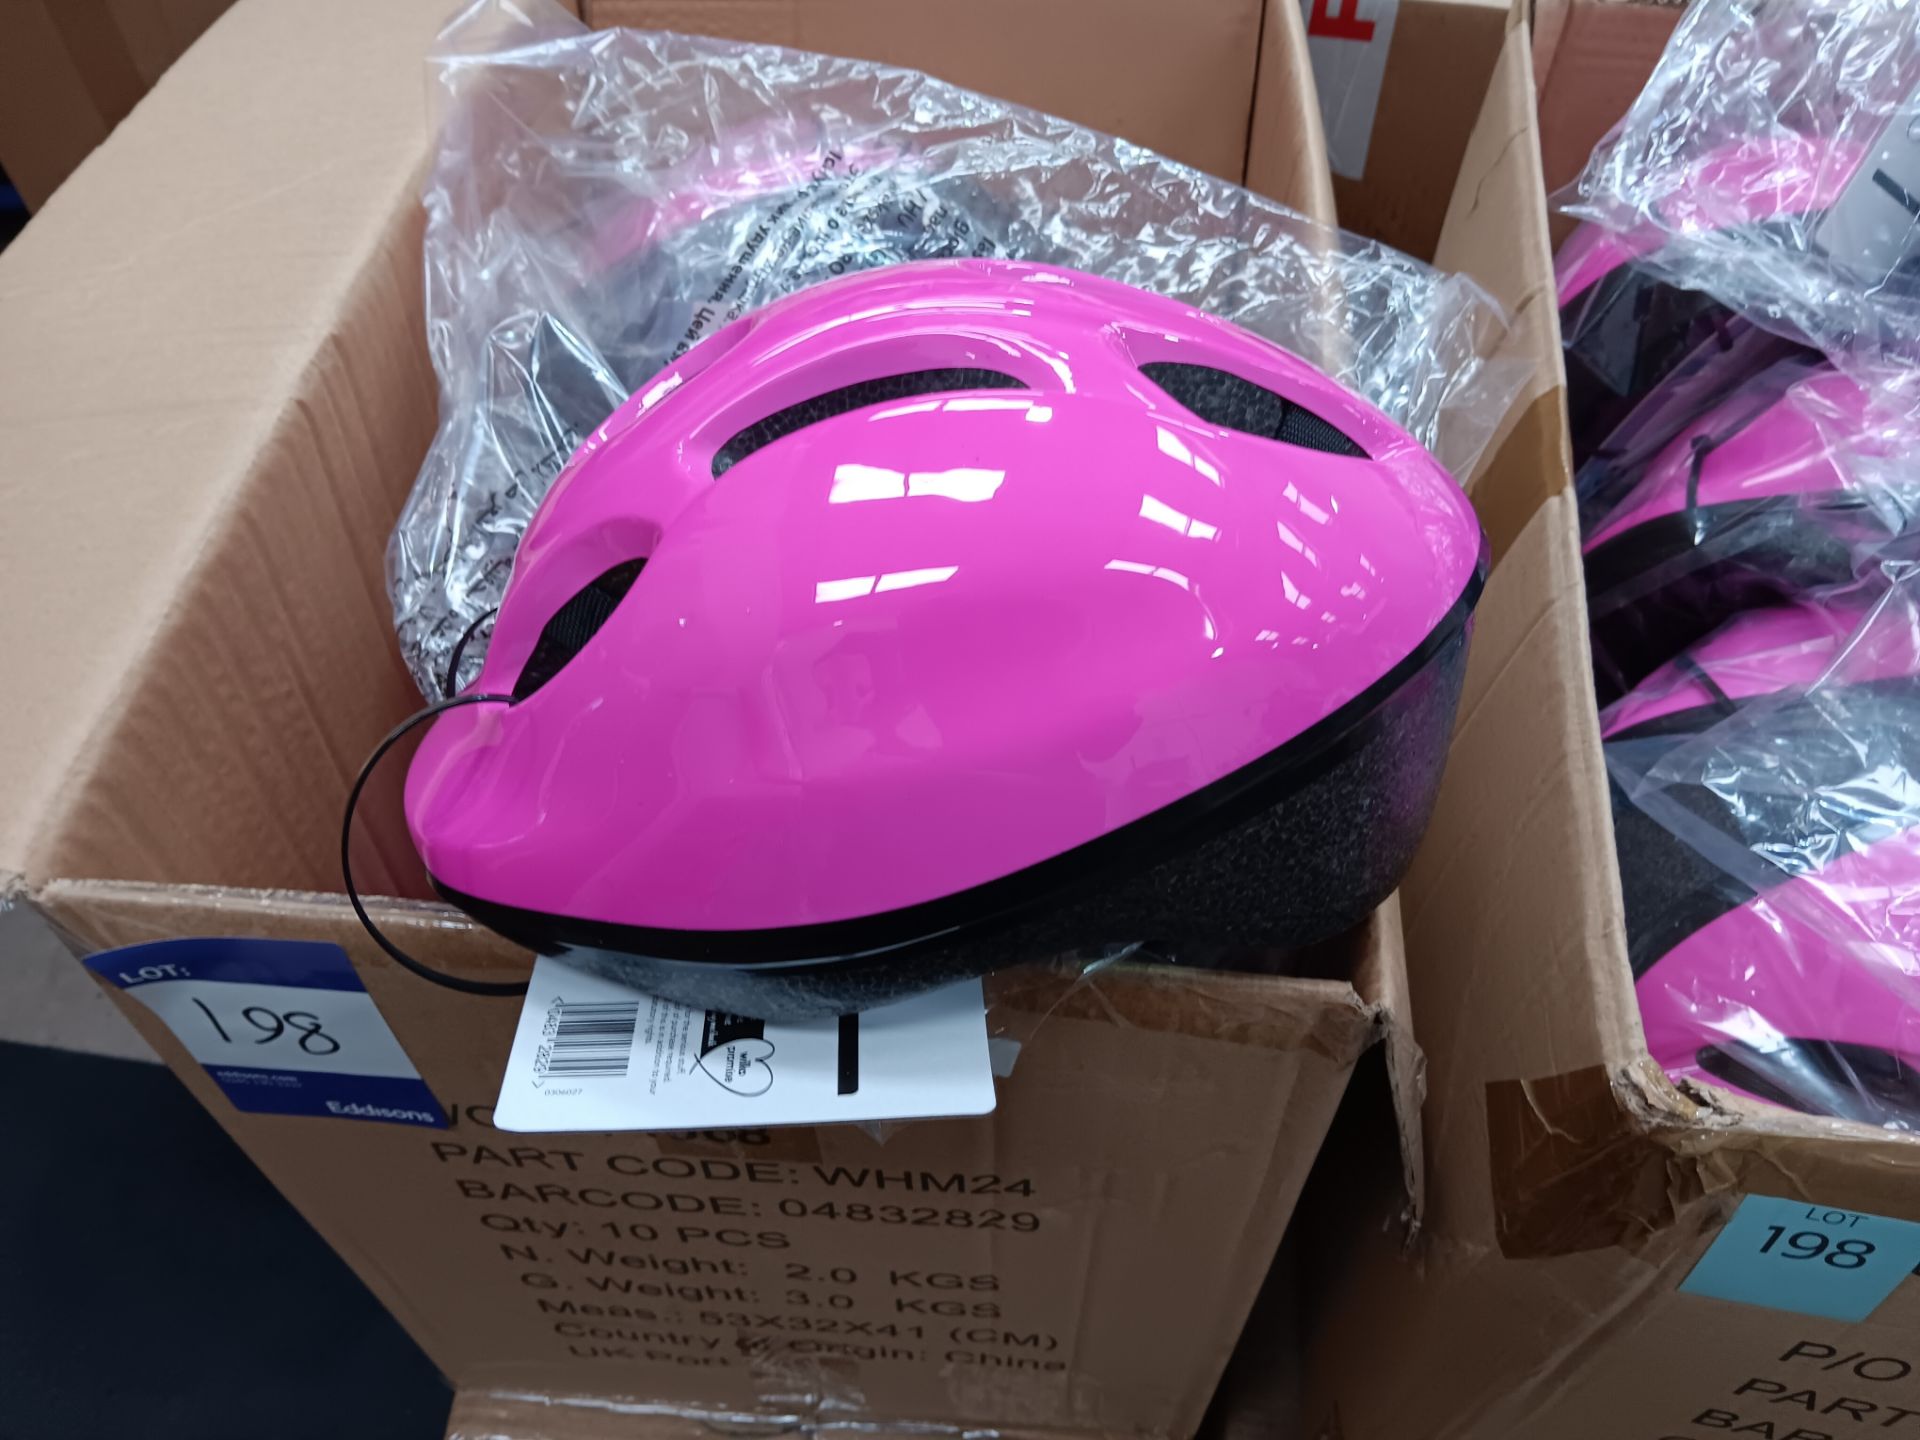 39 x Childrens Bike Helmet, Part Code WHM24, Model Y-22S (Size 46-53), to 4 x Boxes - Image 2 of 2